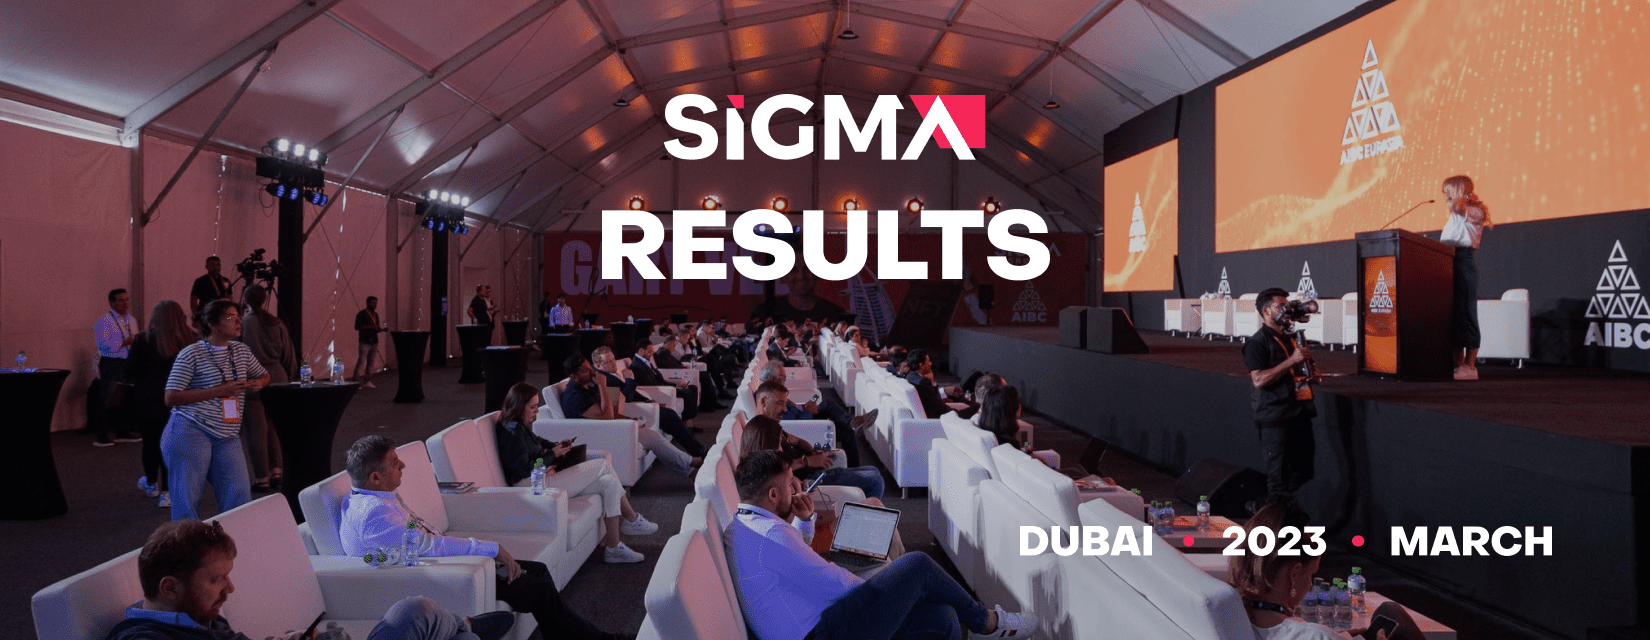 SiGMA Conference Results 